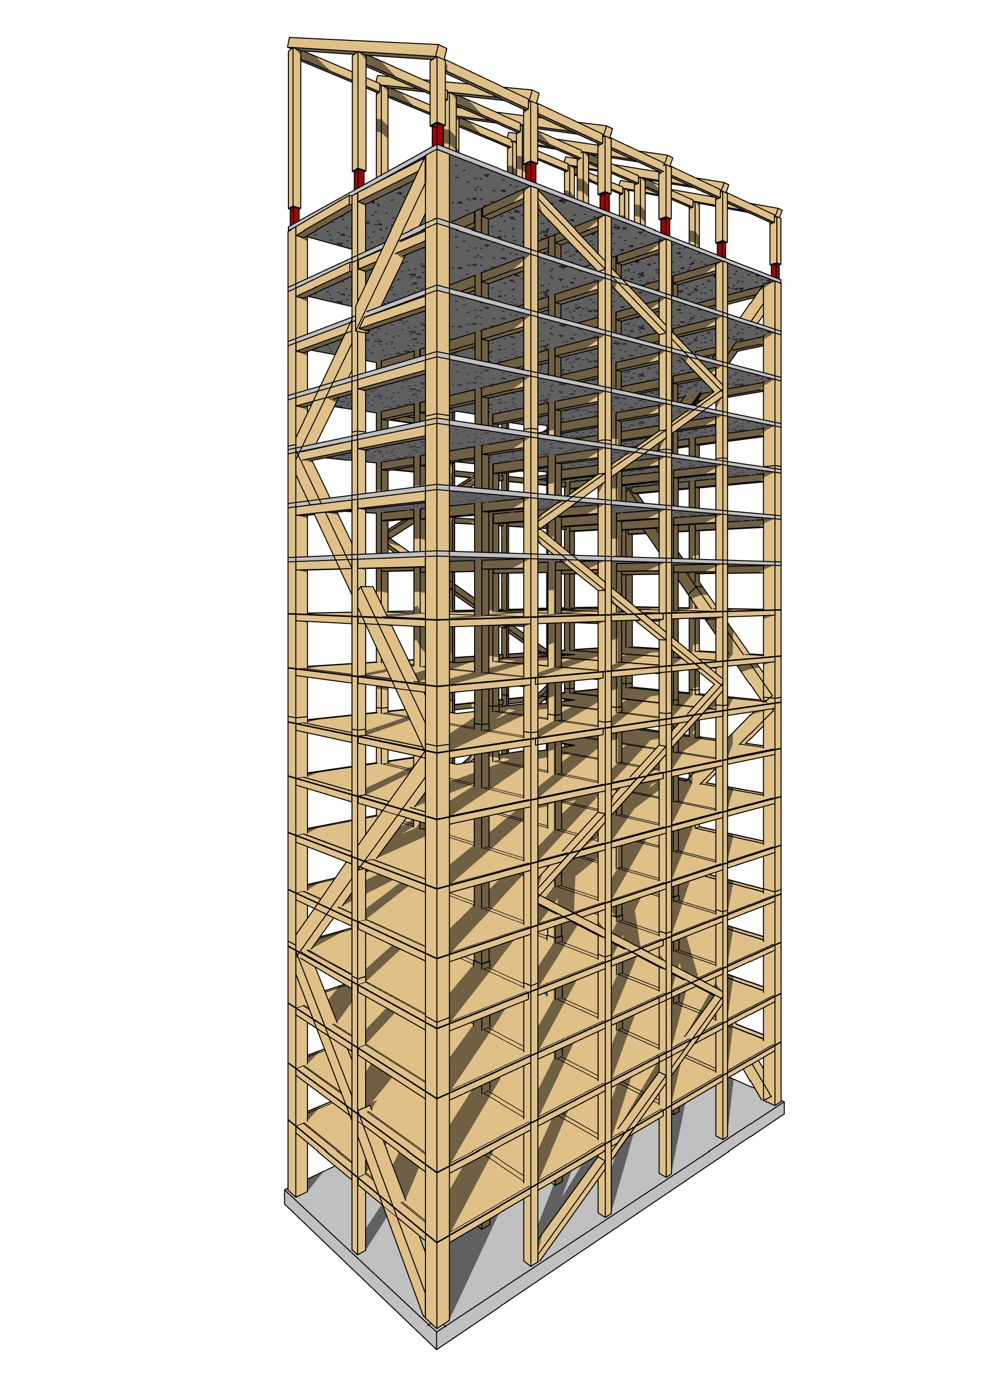 Norway to build world’s tallest timber building